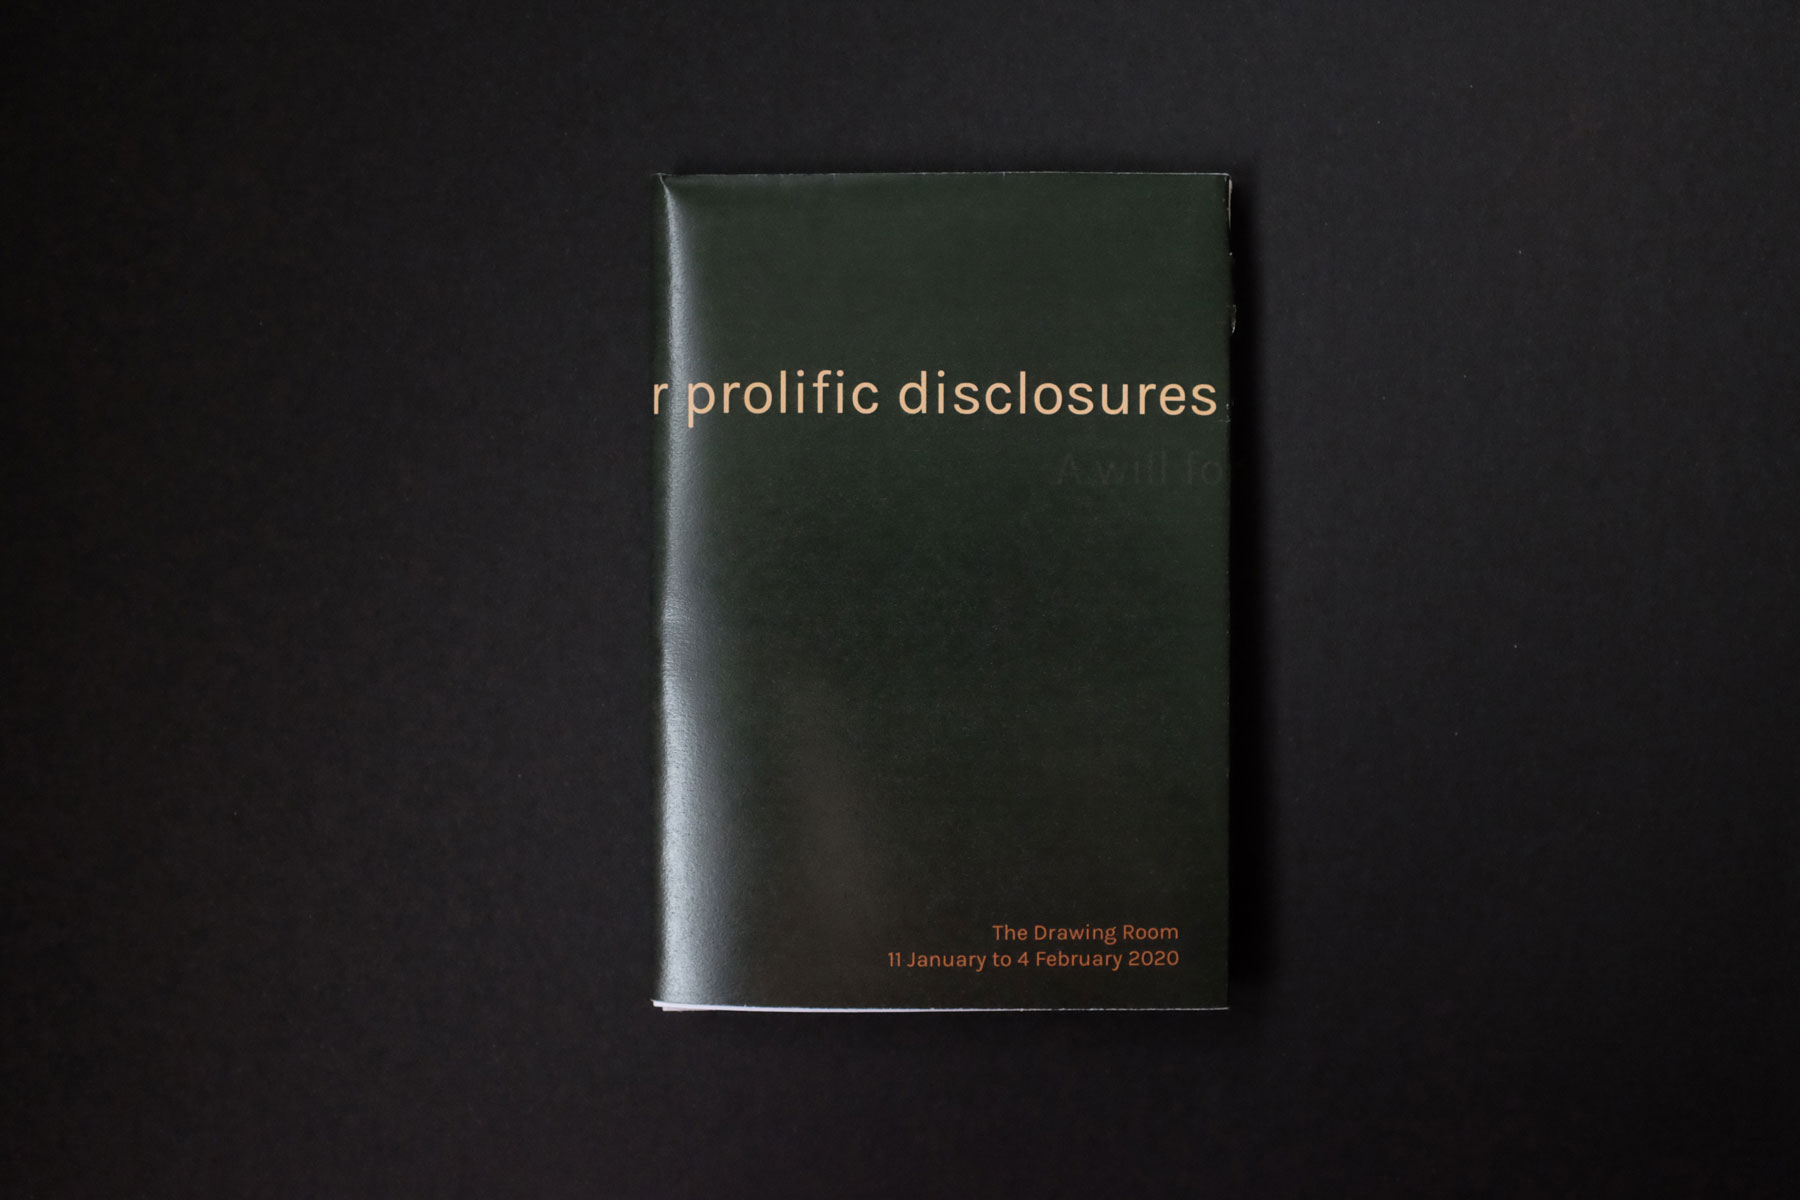 A will for prolific disclosures: a zine